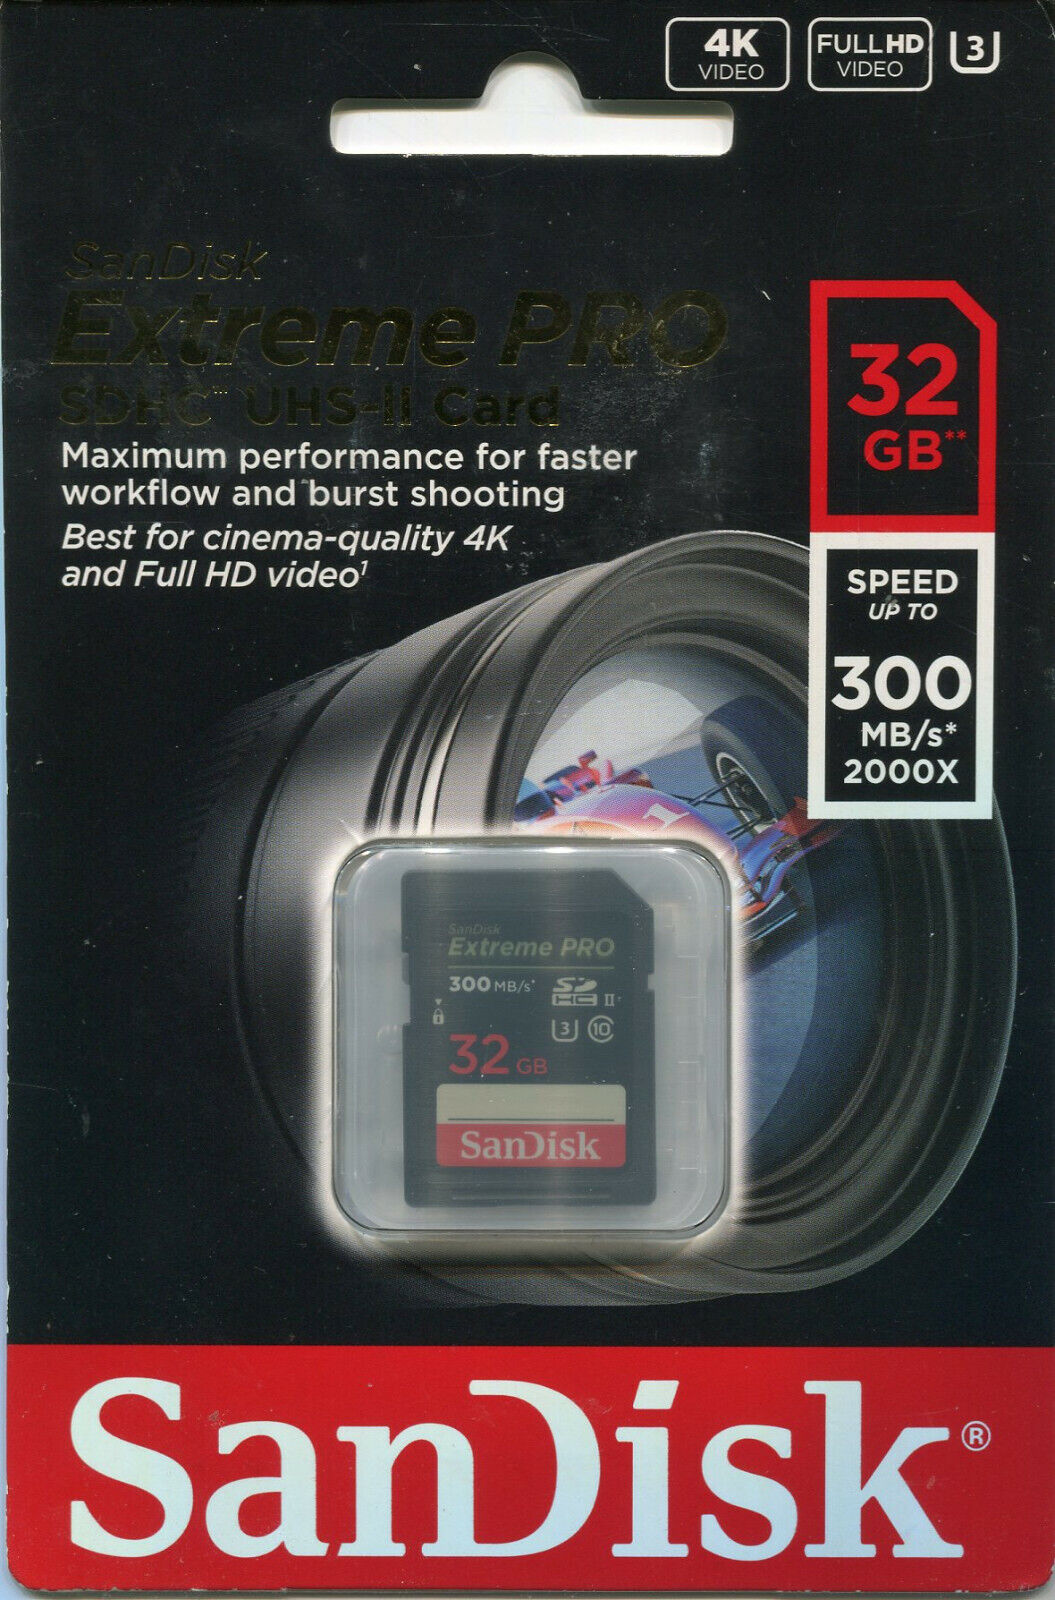 Sandisk Extreme PRO 32GB SDHC Y+UHS-II Card NEW 300 mb/s 2000x speed